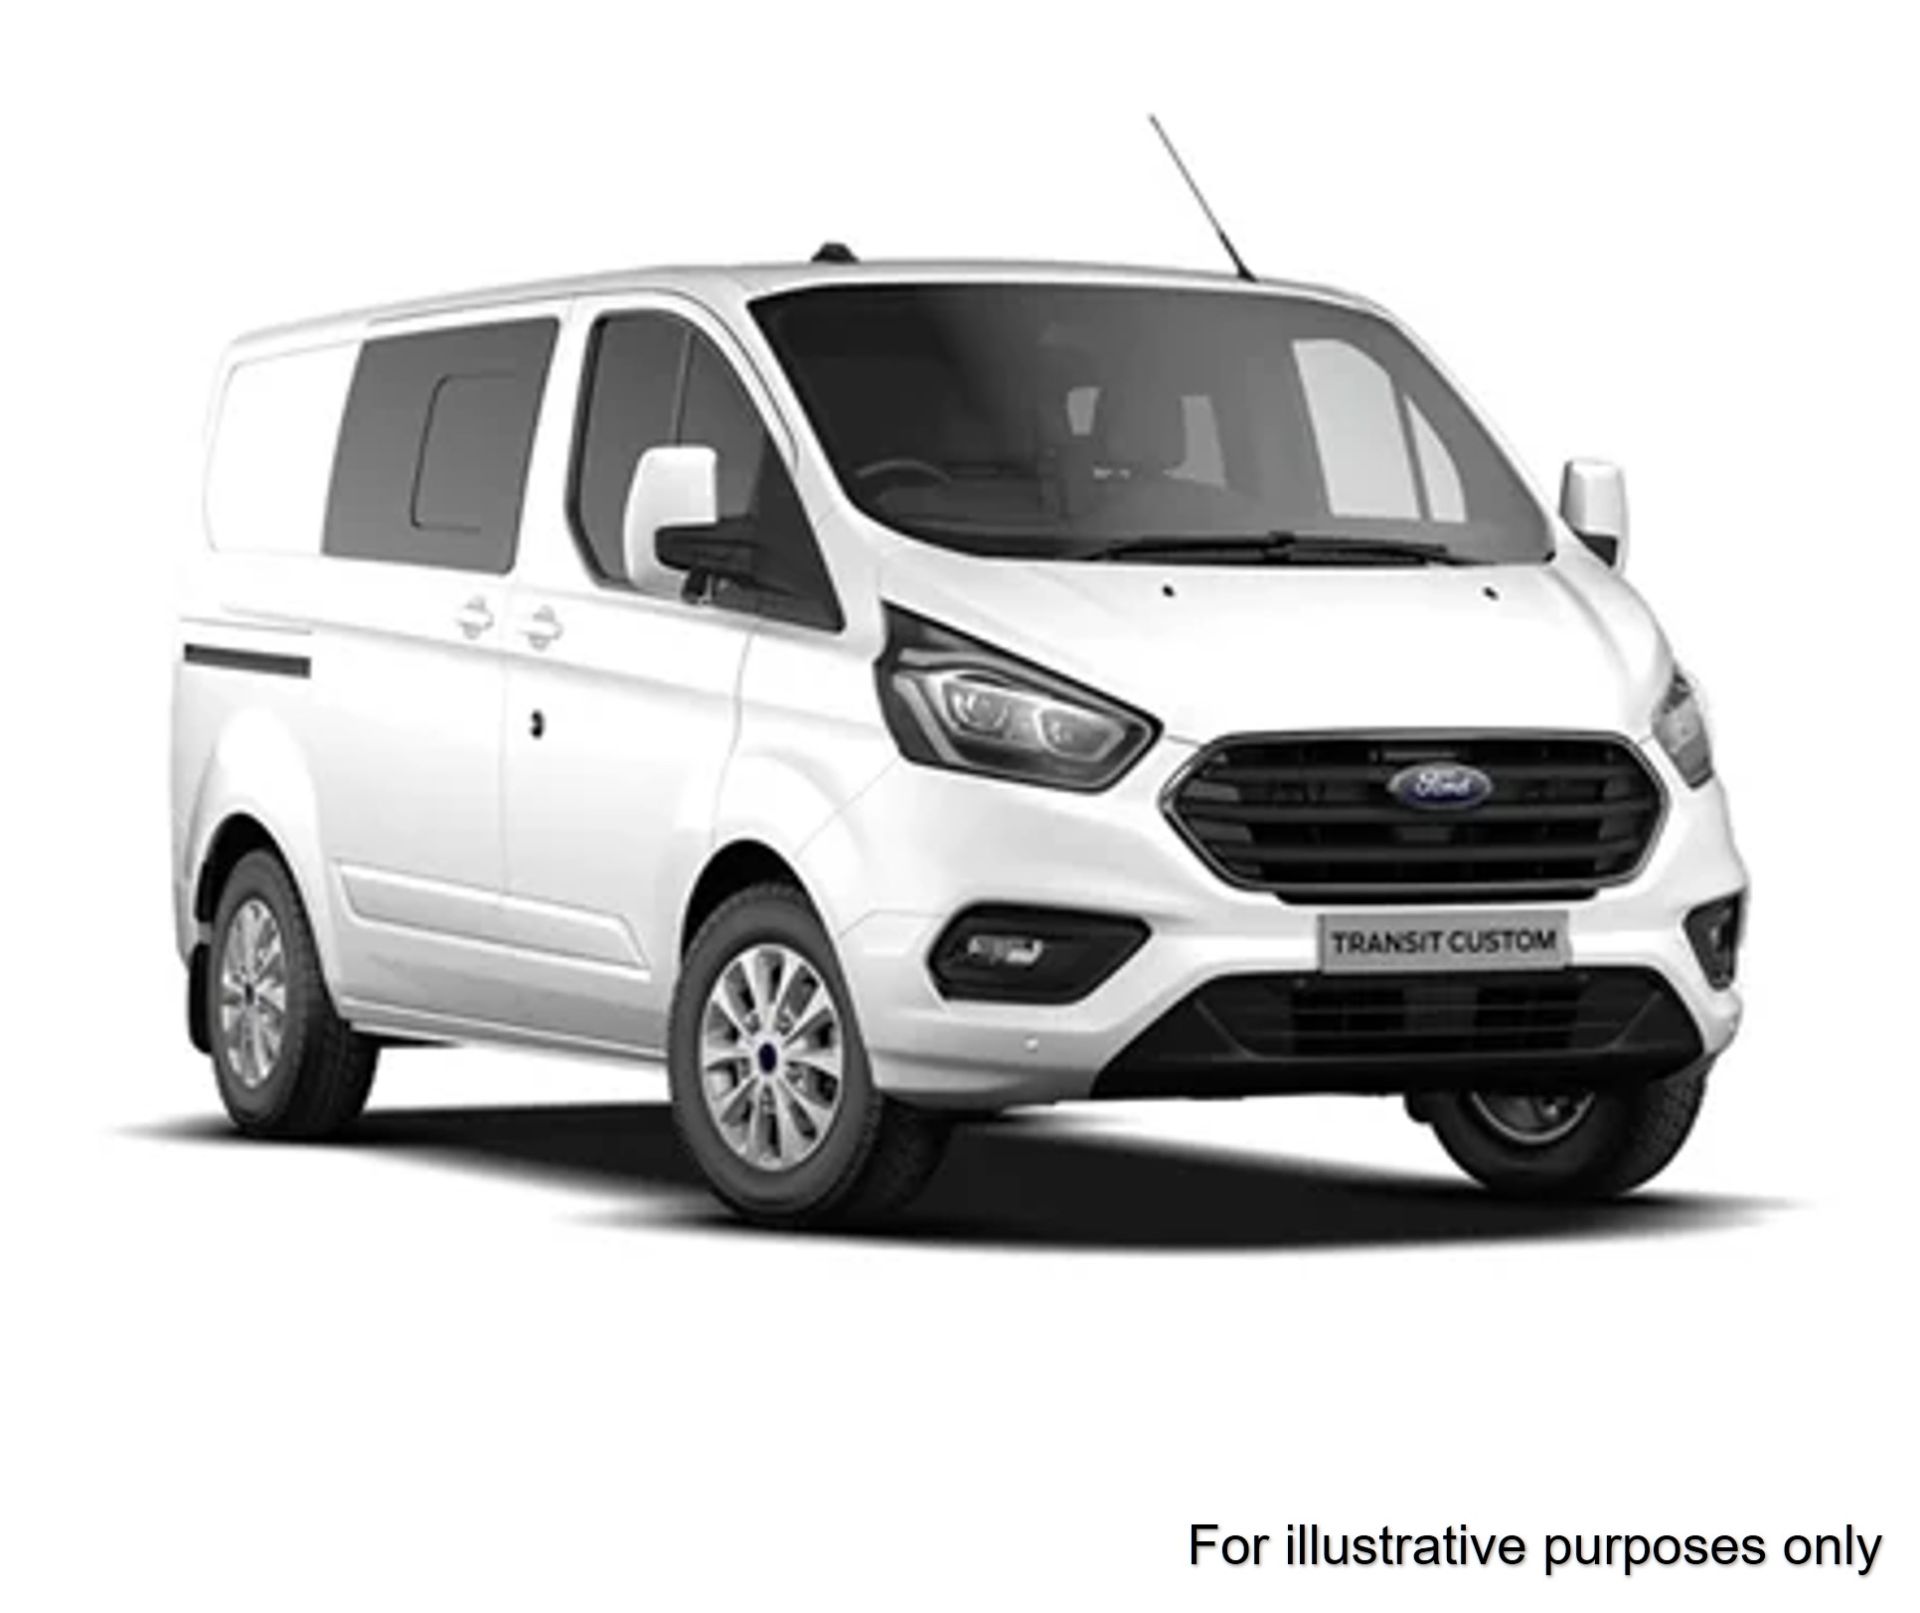 2019 Ford Transit Custom 320 L2 FWD 2.0TDCI 170PS LOW ROOF DOUBLE CAB LIMITED (FM19HSV)